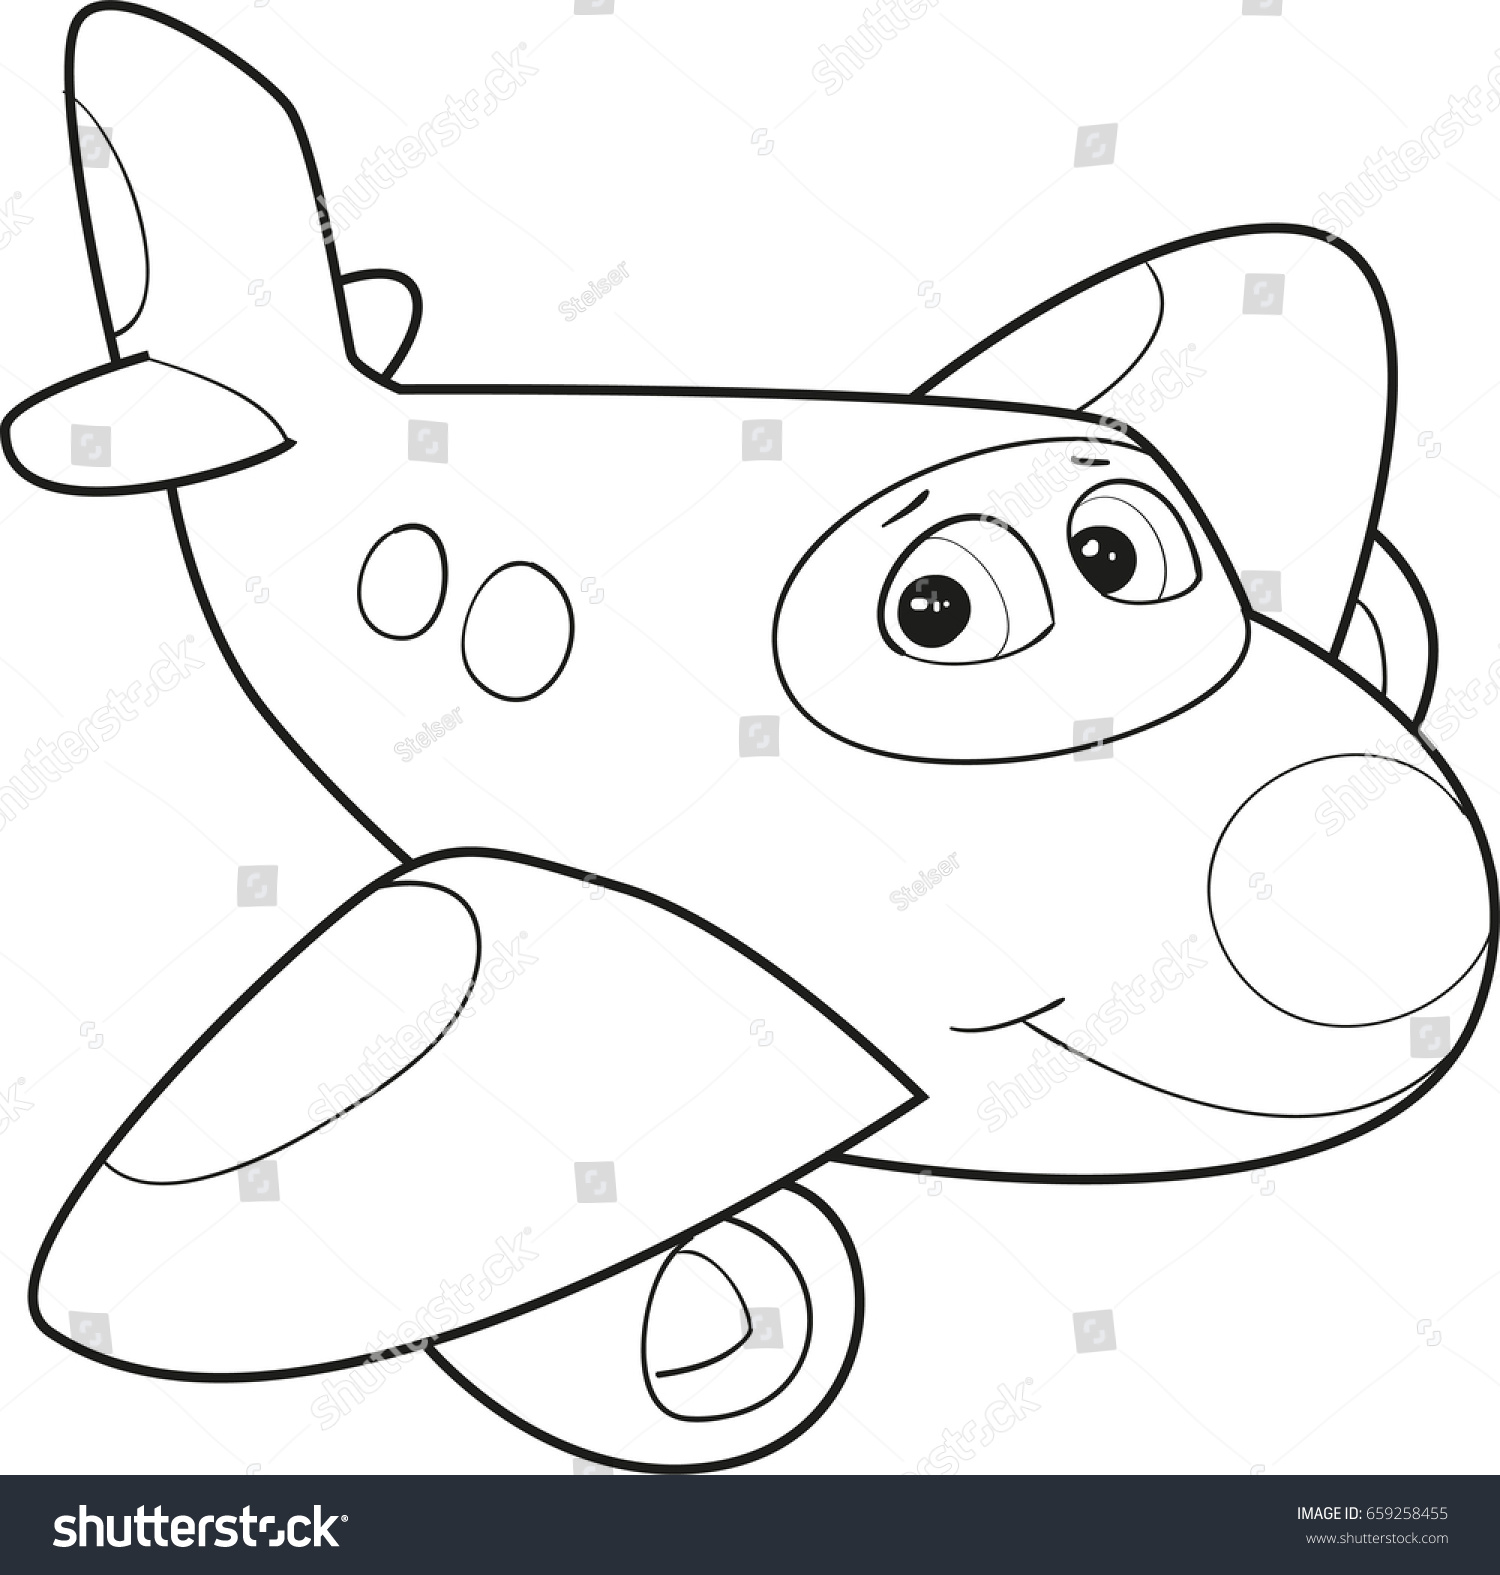 Coloring Page Outline Cartoon Smiling Airplane Stock Vector Illustration Book